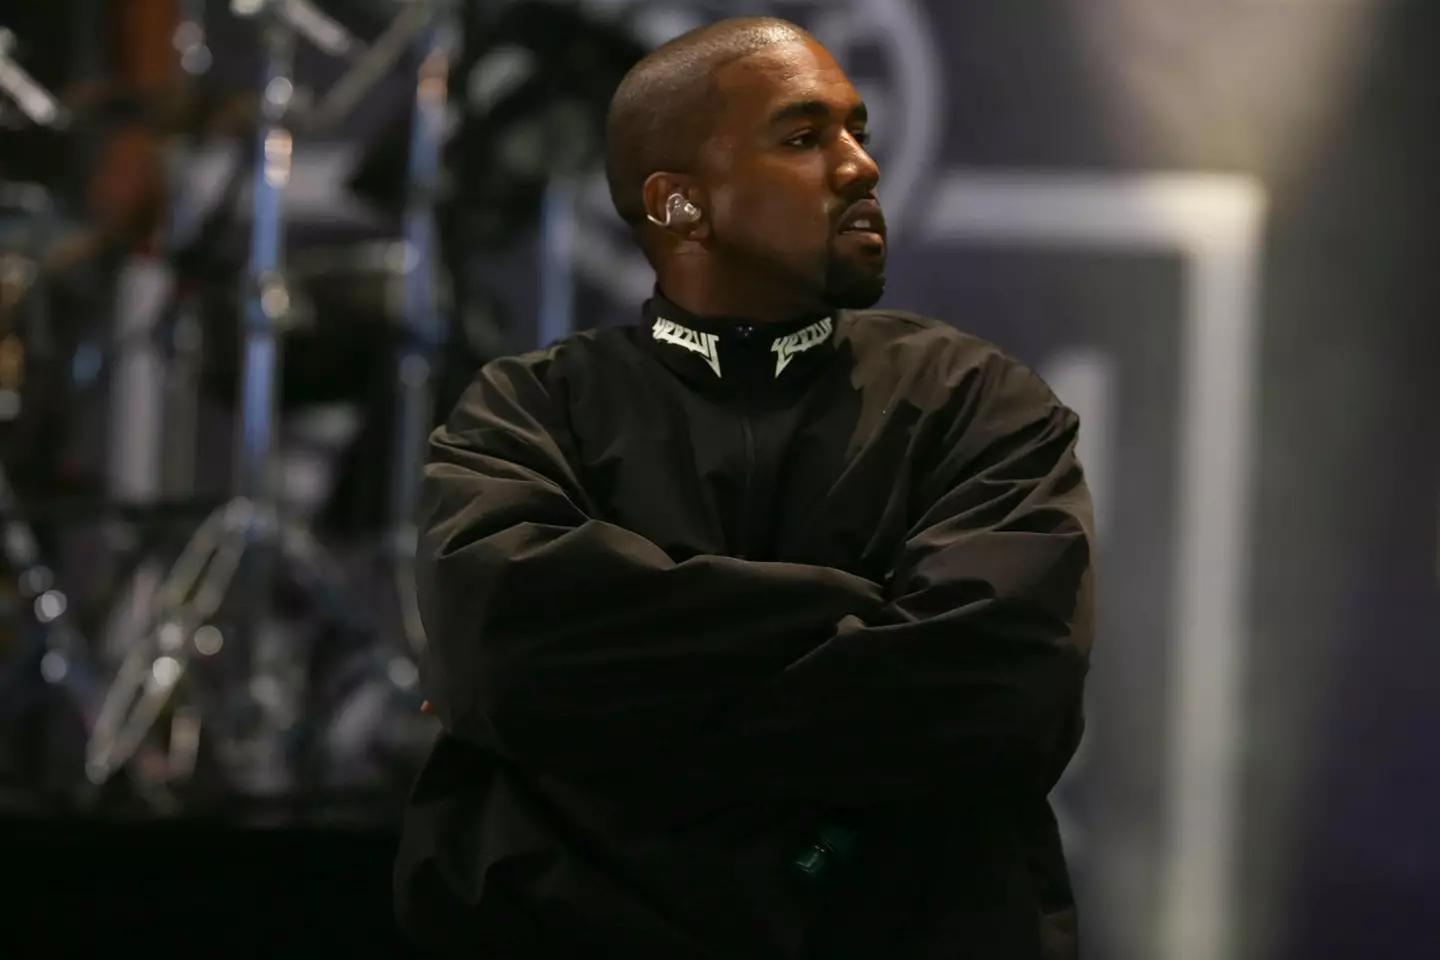 Kanye West agreed that his comments about Jewish people were racist.